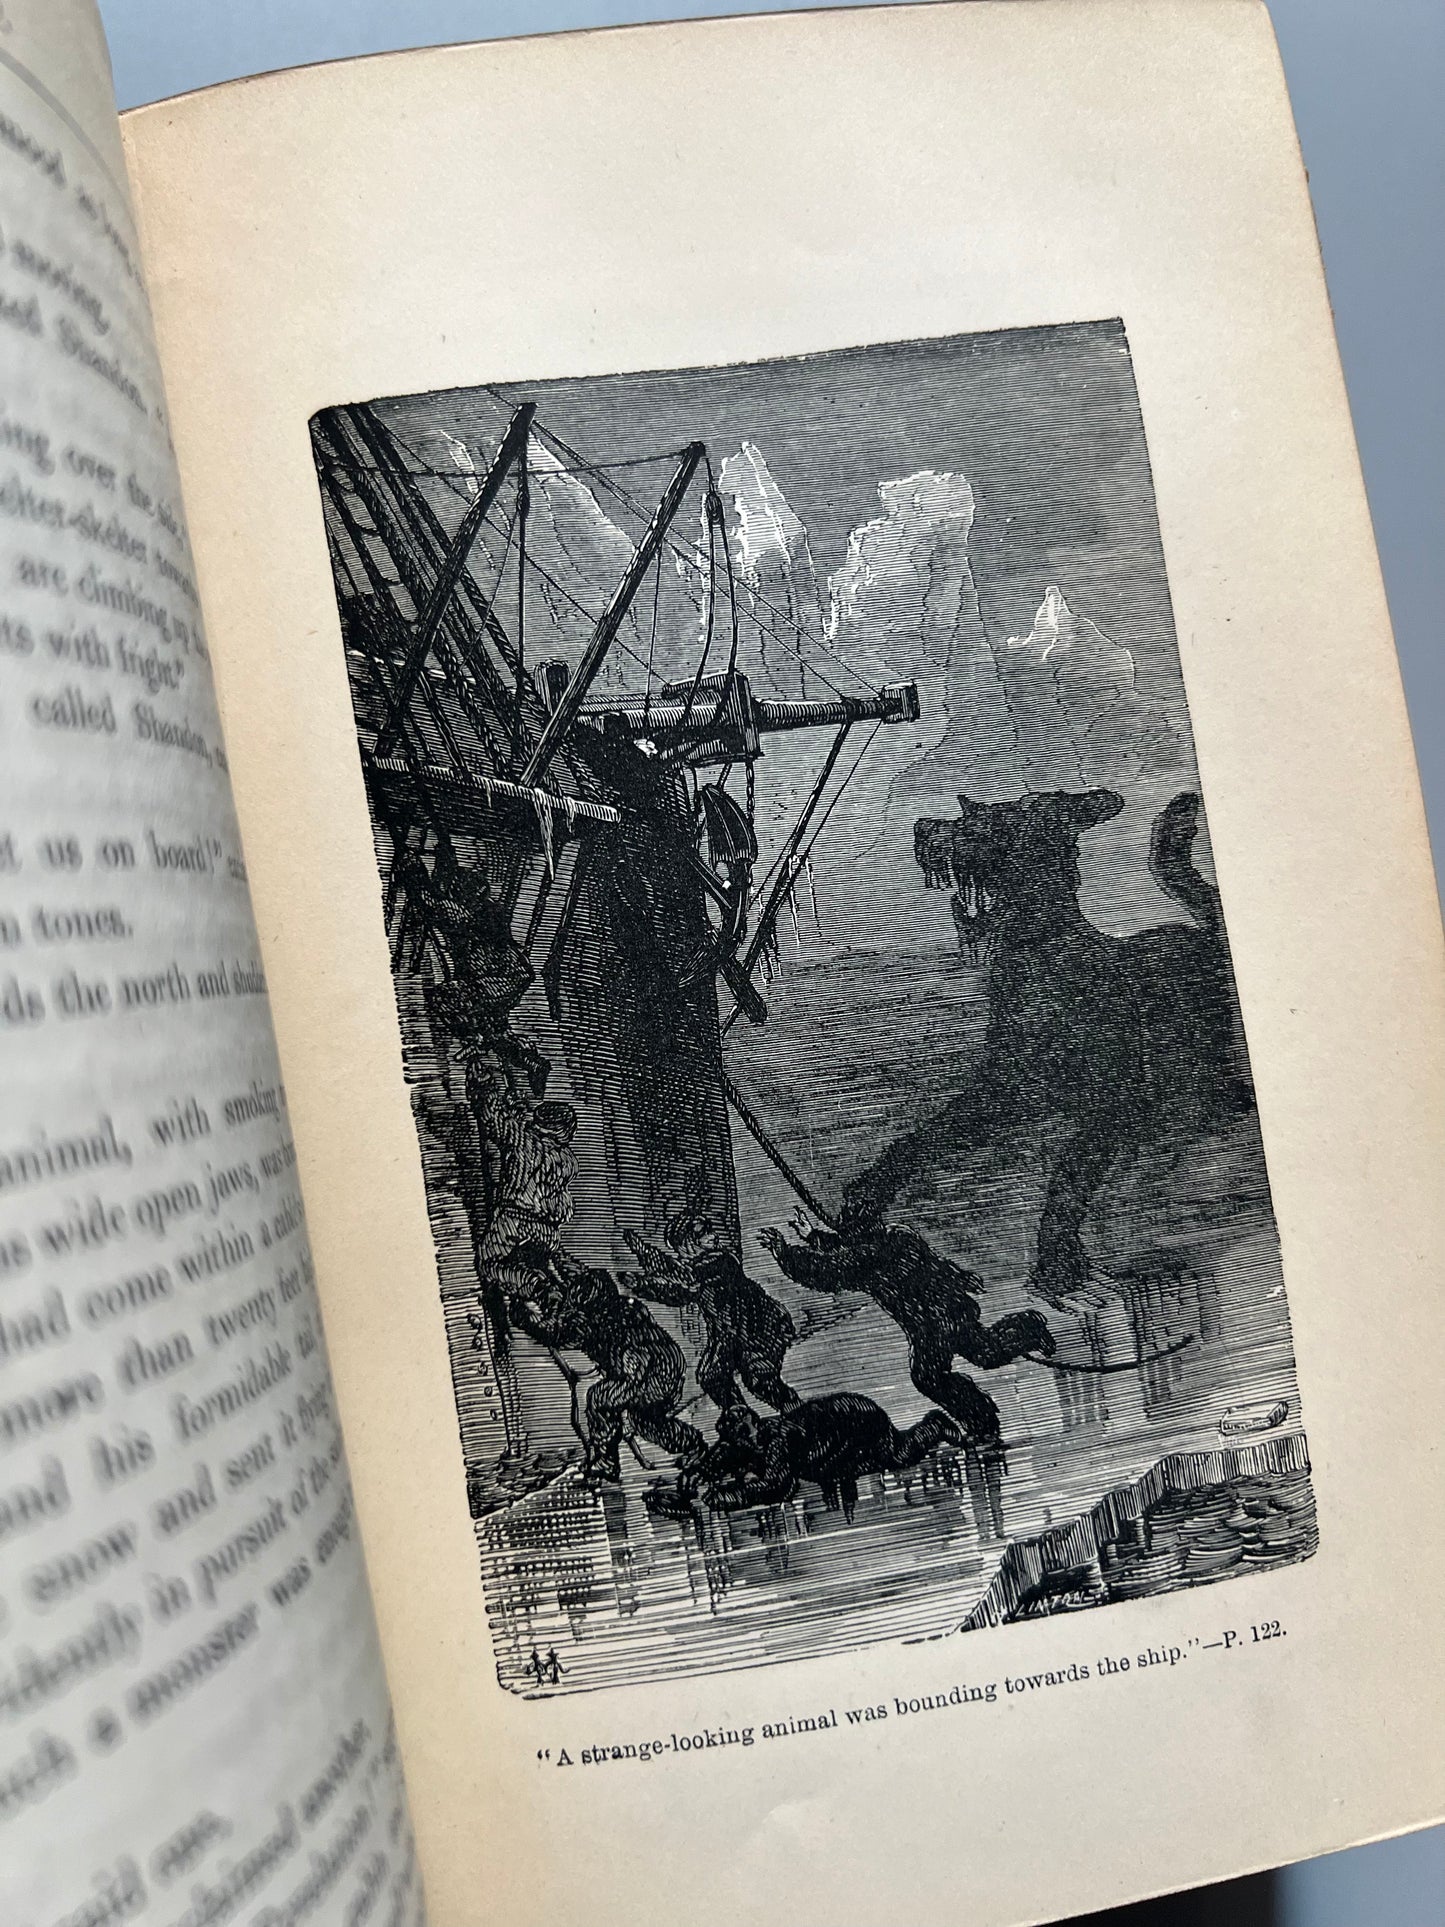 The adventures of Captain Hatteras, Julio Verne (first english edition in one volume) - George Routledge and sons, 1876